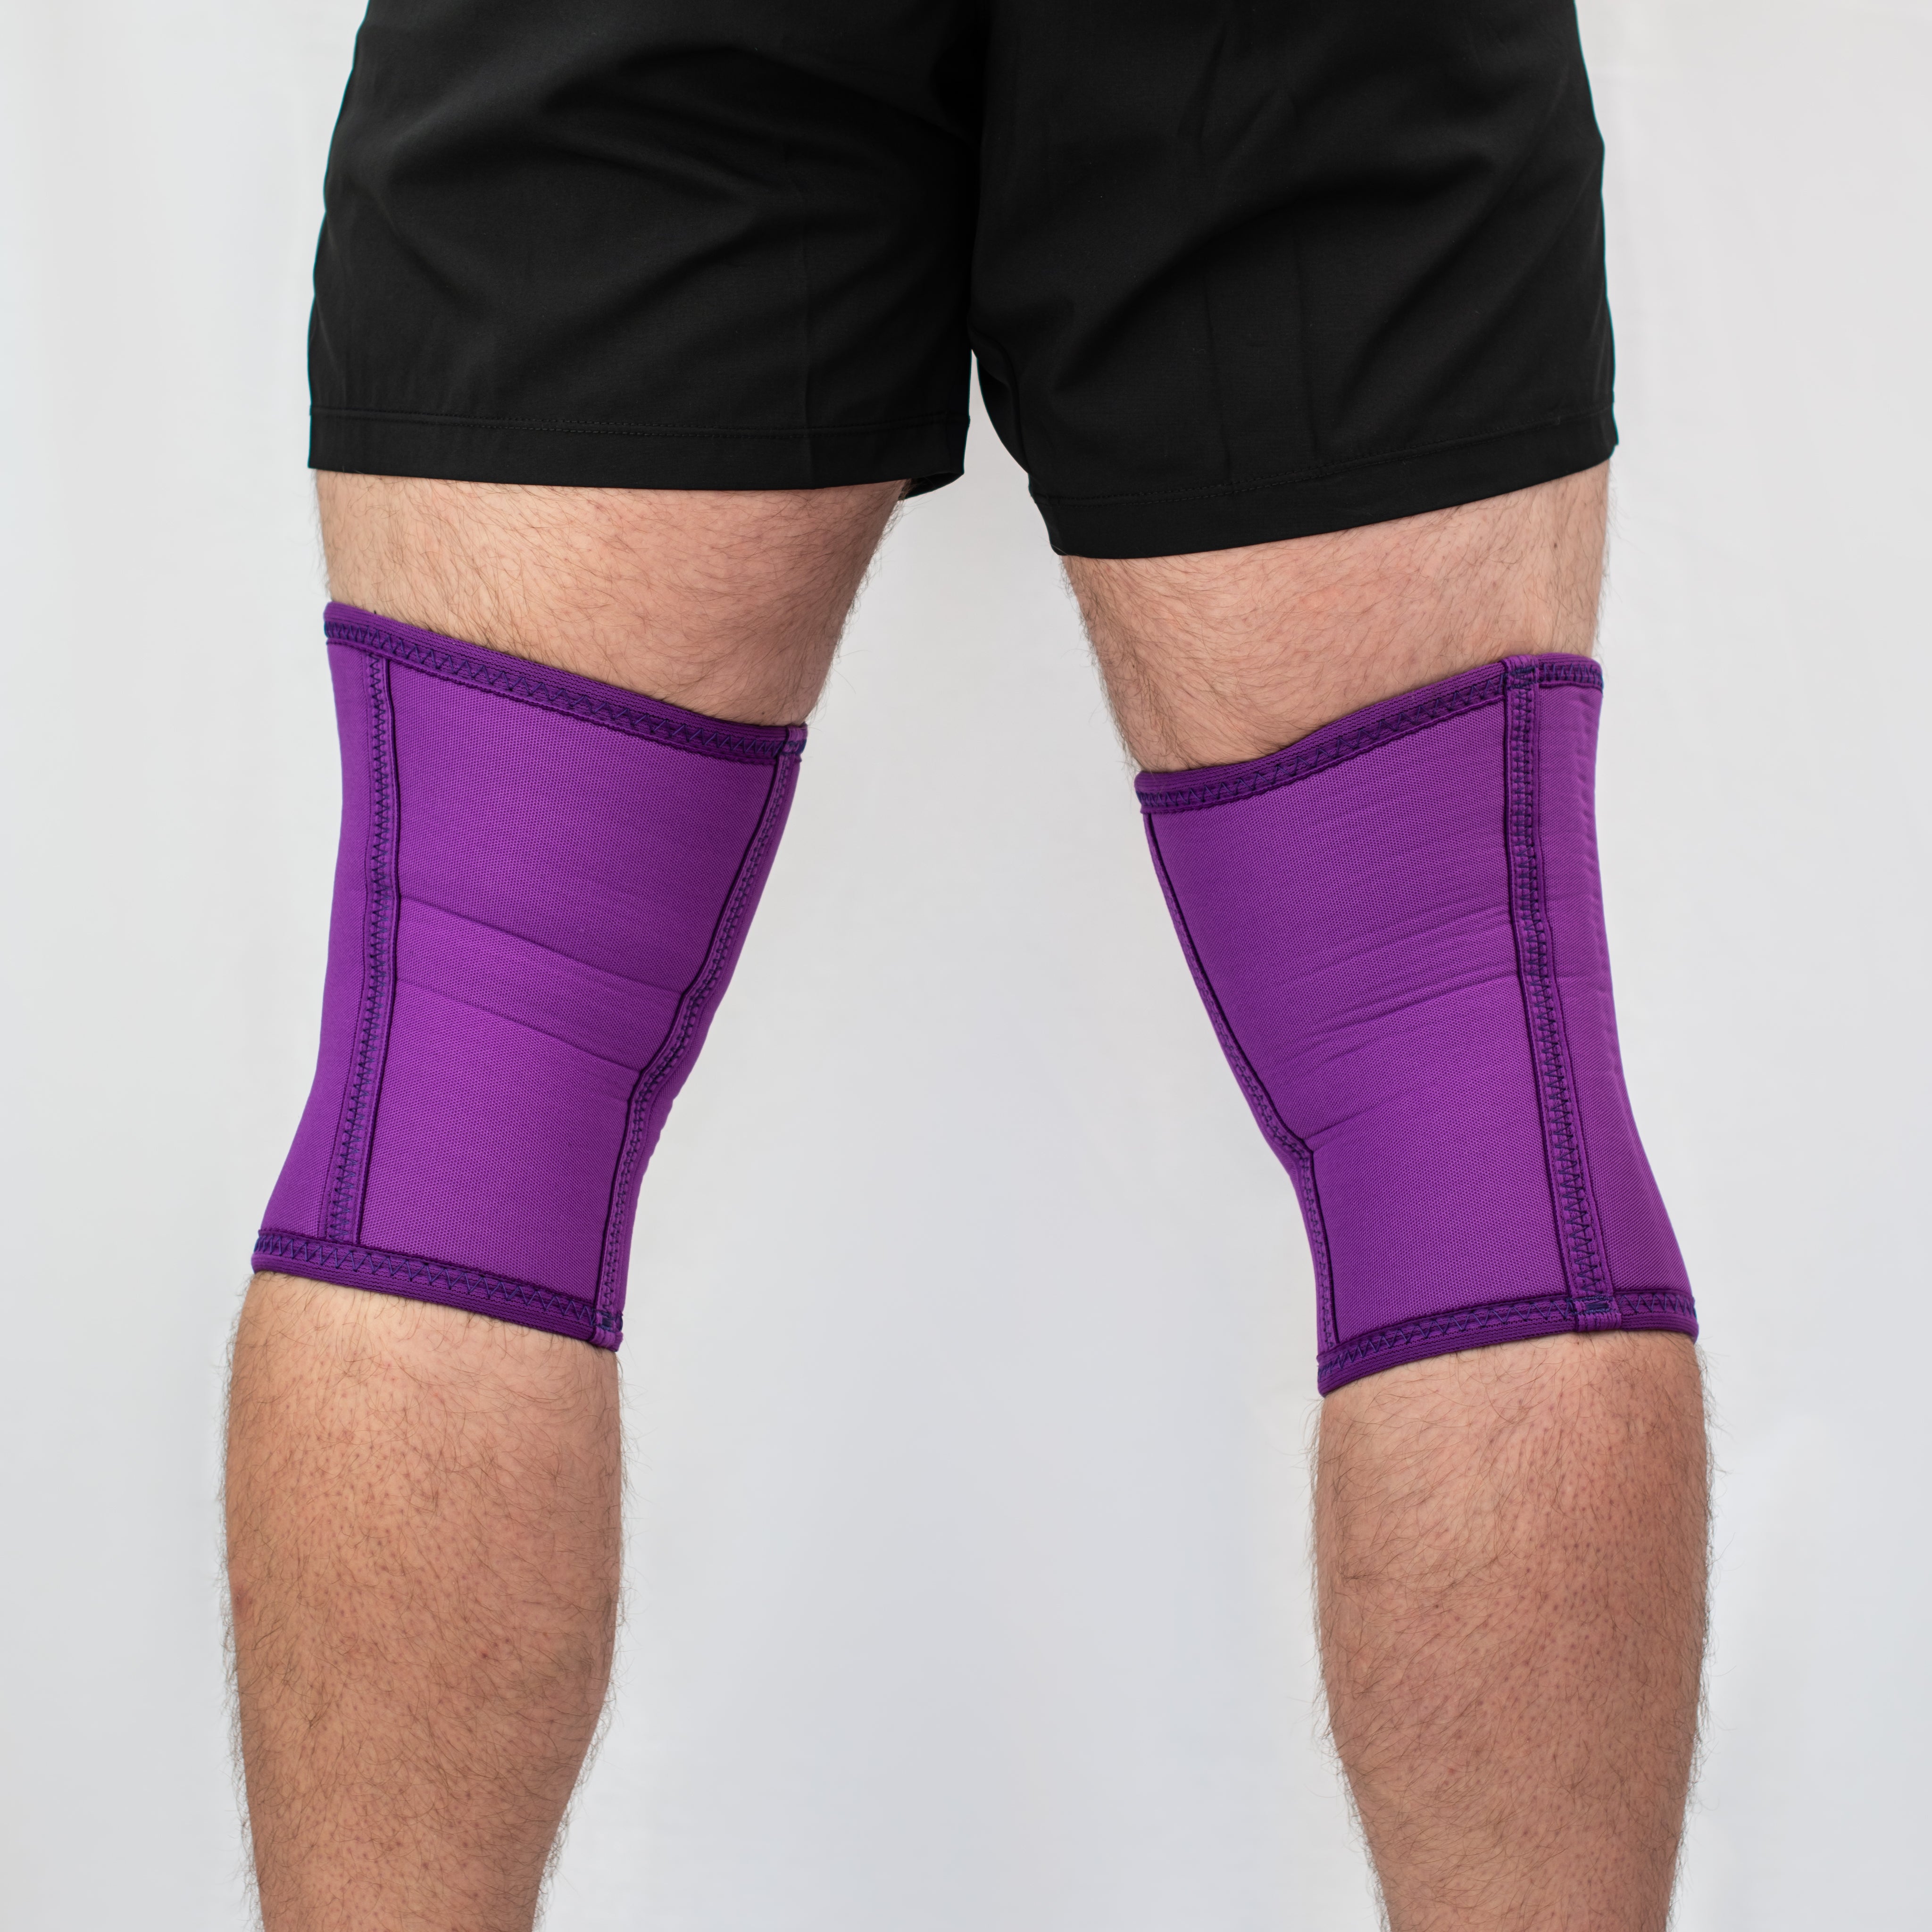 CONE Purple Knee Sleeves (Gray Logo) - USPA & IPF Approved – A7